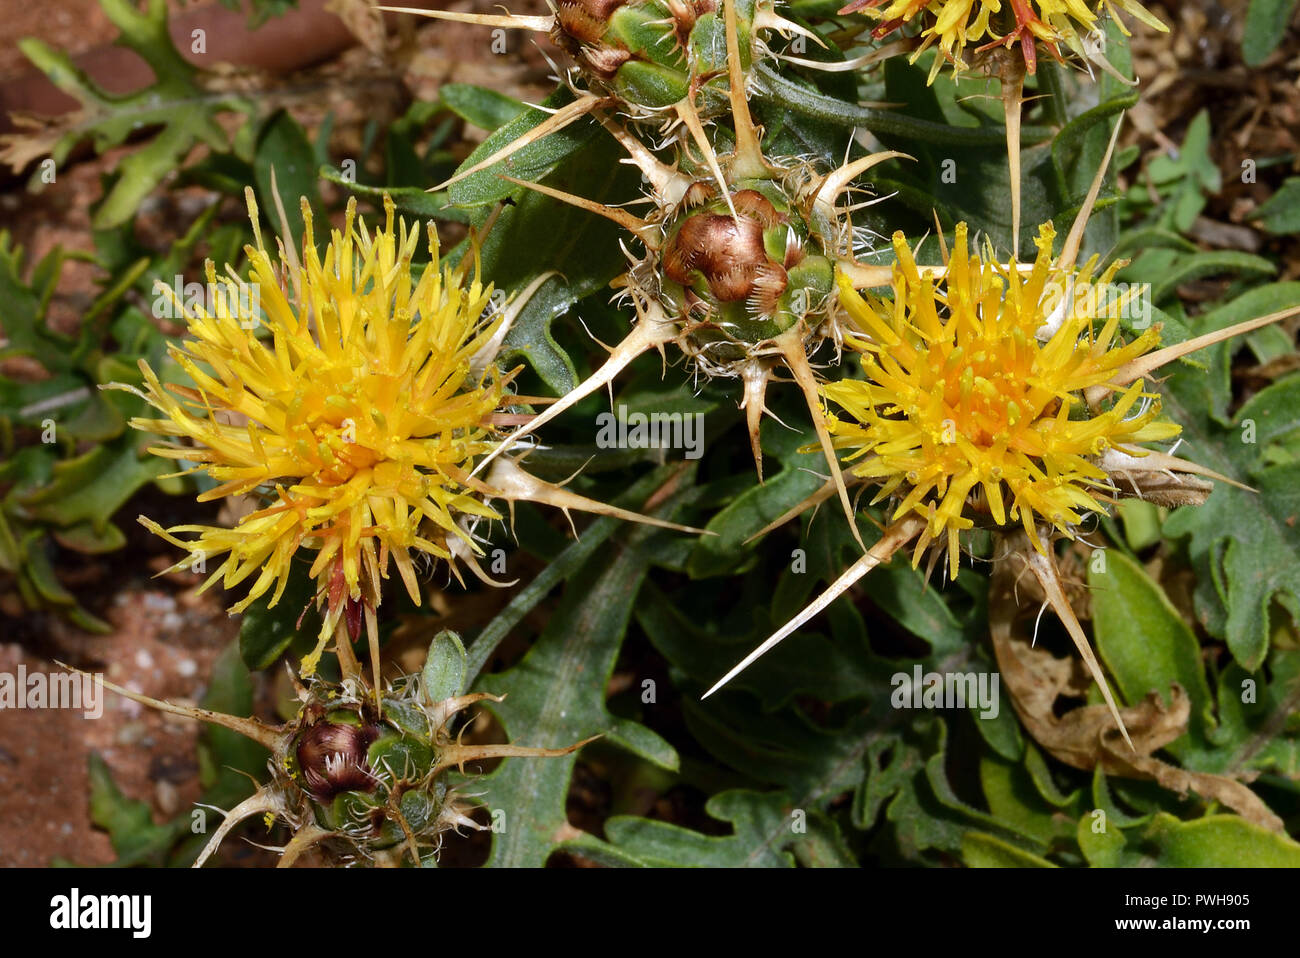 Centaurea kunkelii is a species that appears to be endemic to Andalusia, Spain. Stock Photo